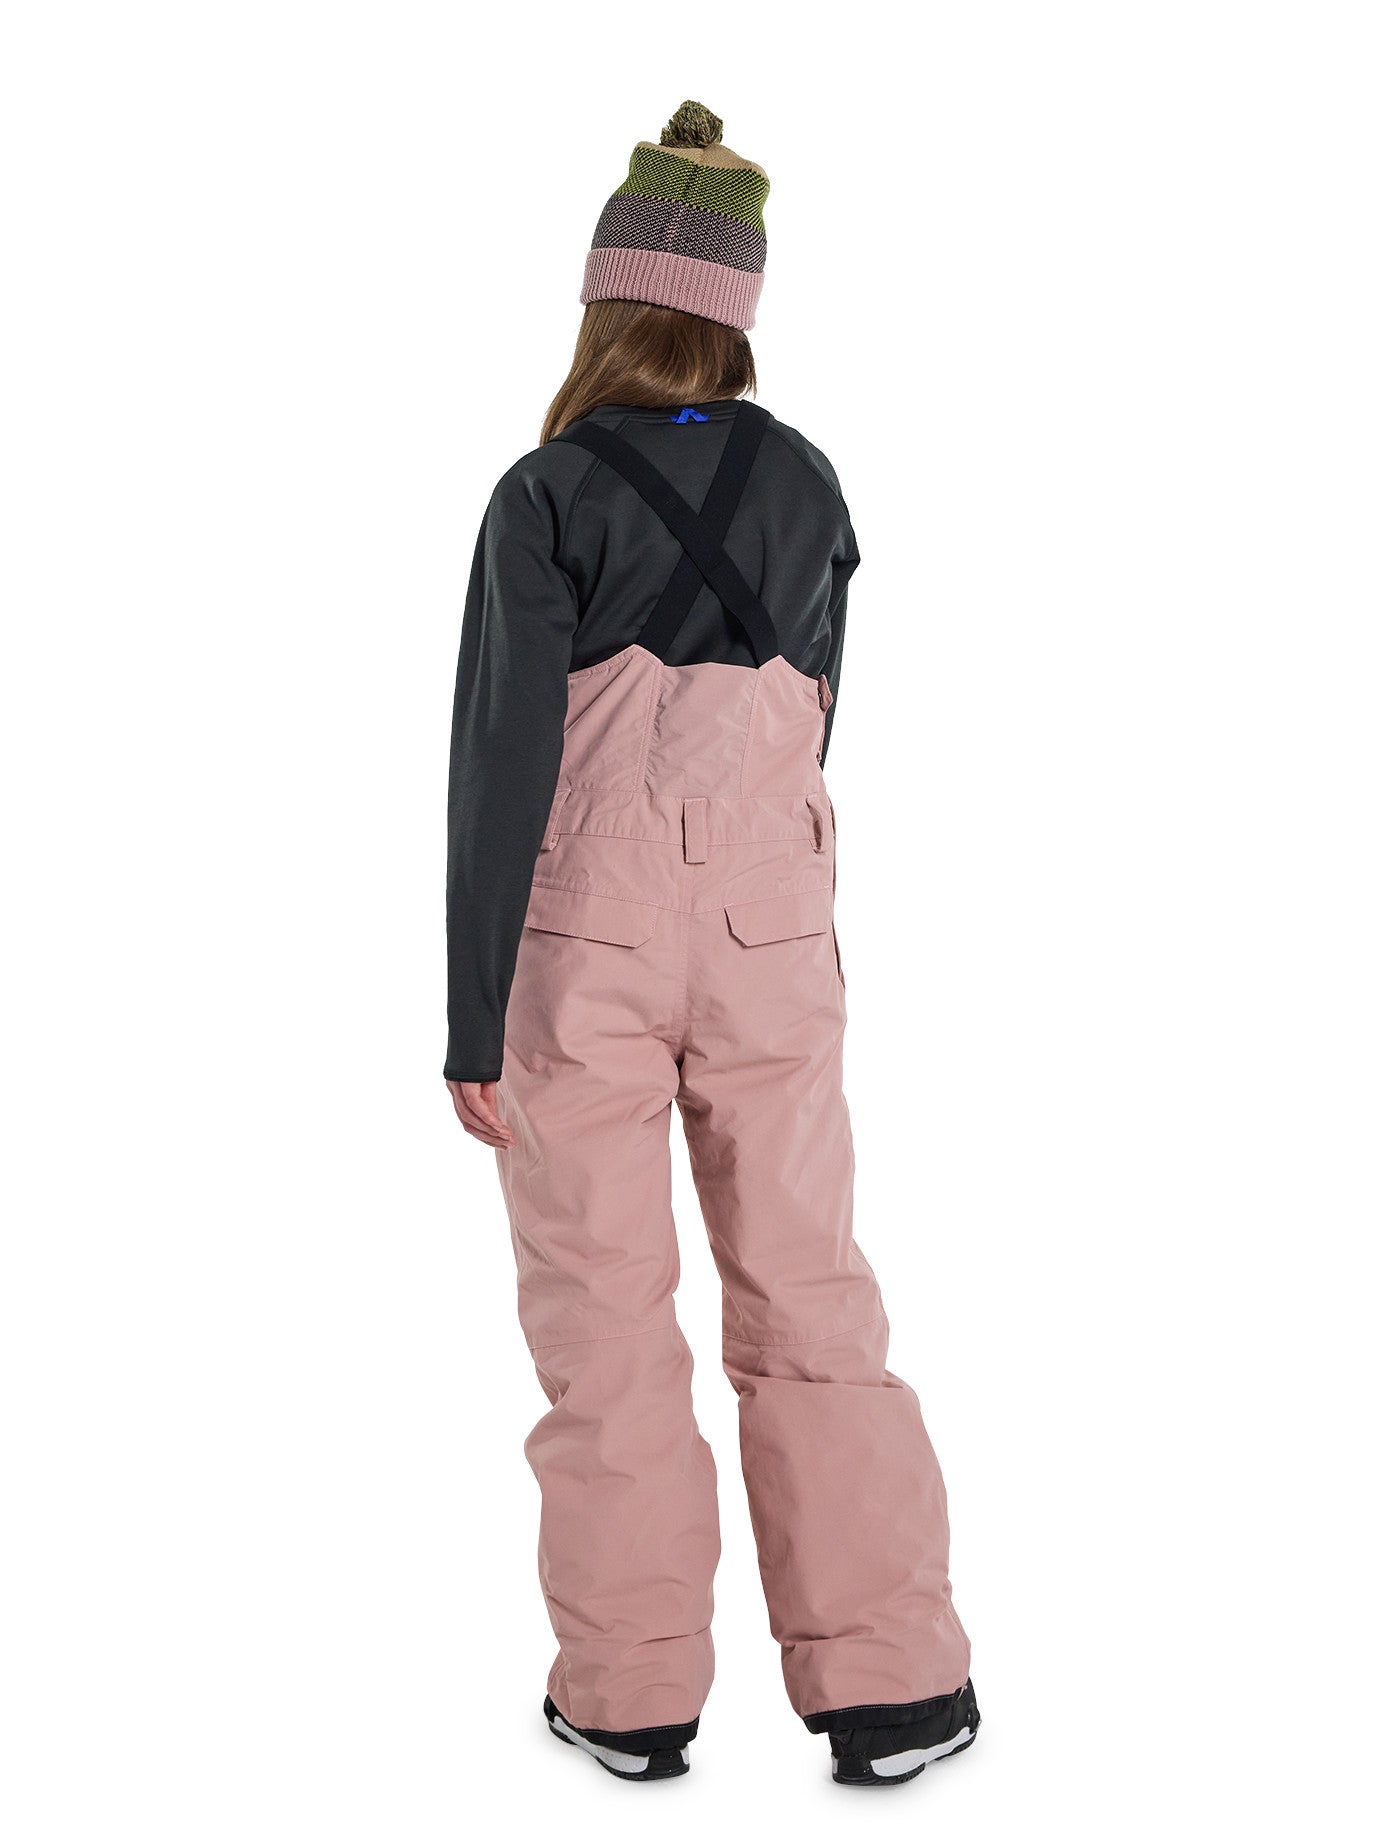 Kids Skylar BIB Pants - Snowboard pants with straps for children and teenagers